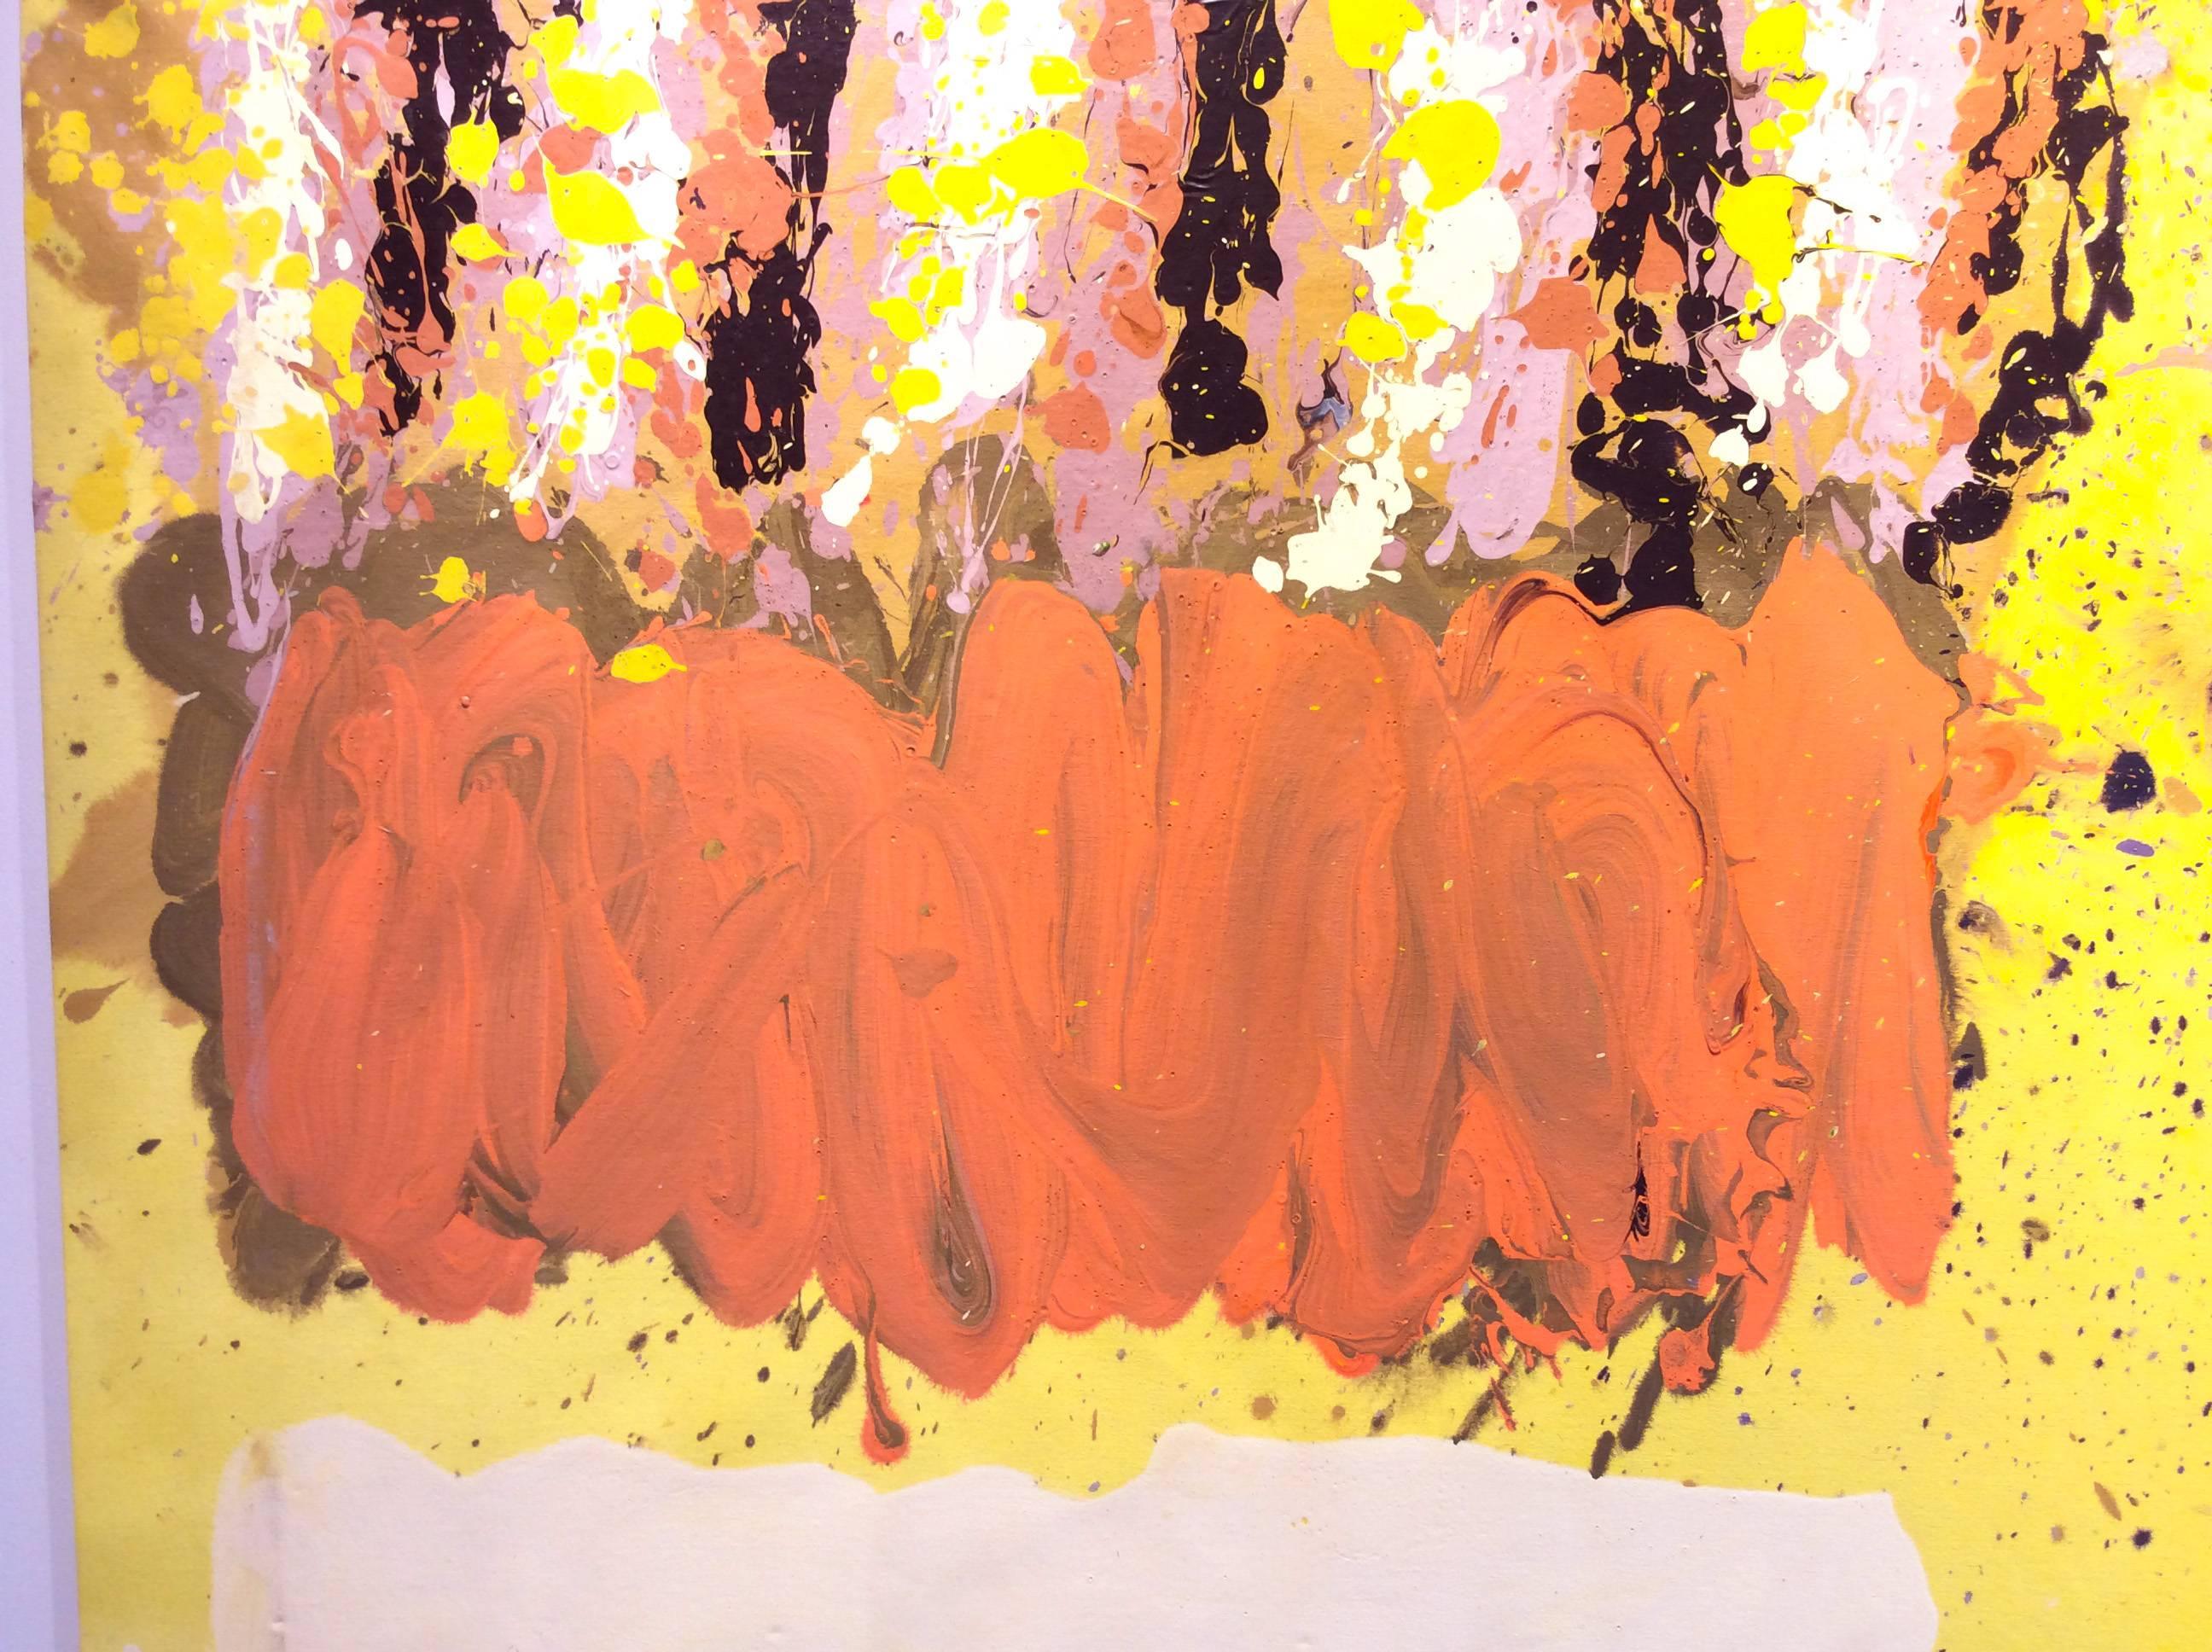 Untitled 033 (1970s Abstract Expressionist Canvas in Canary Yellow & Orange) 1